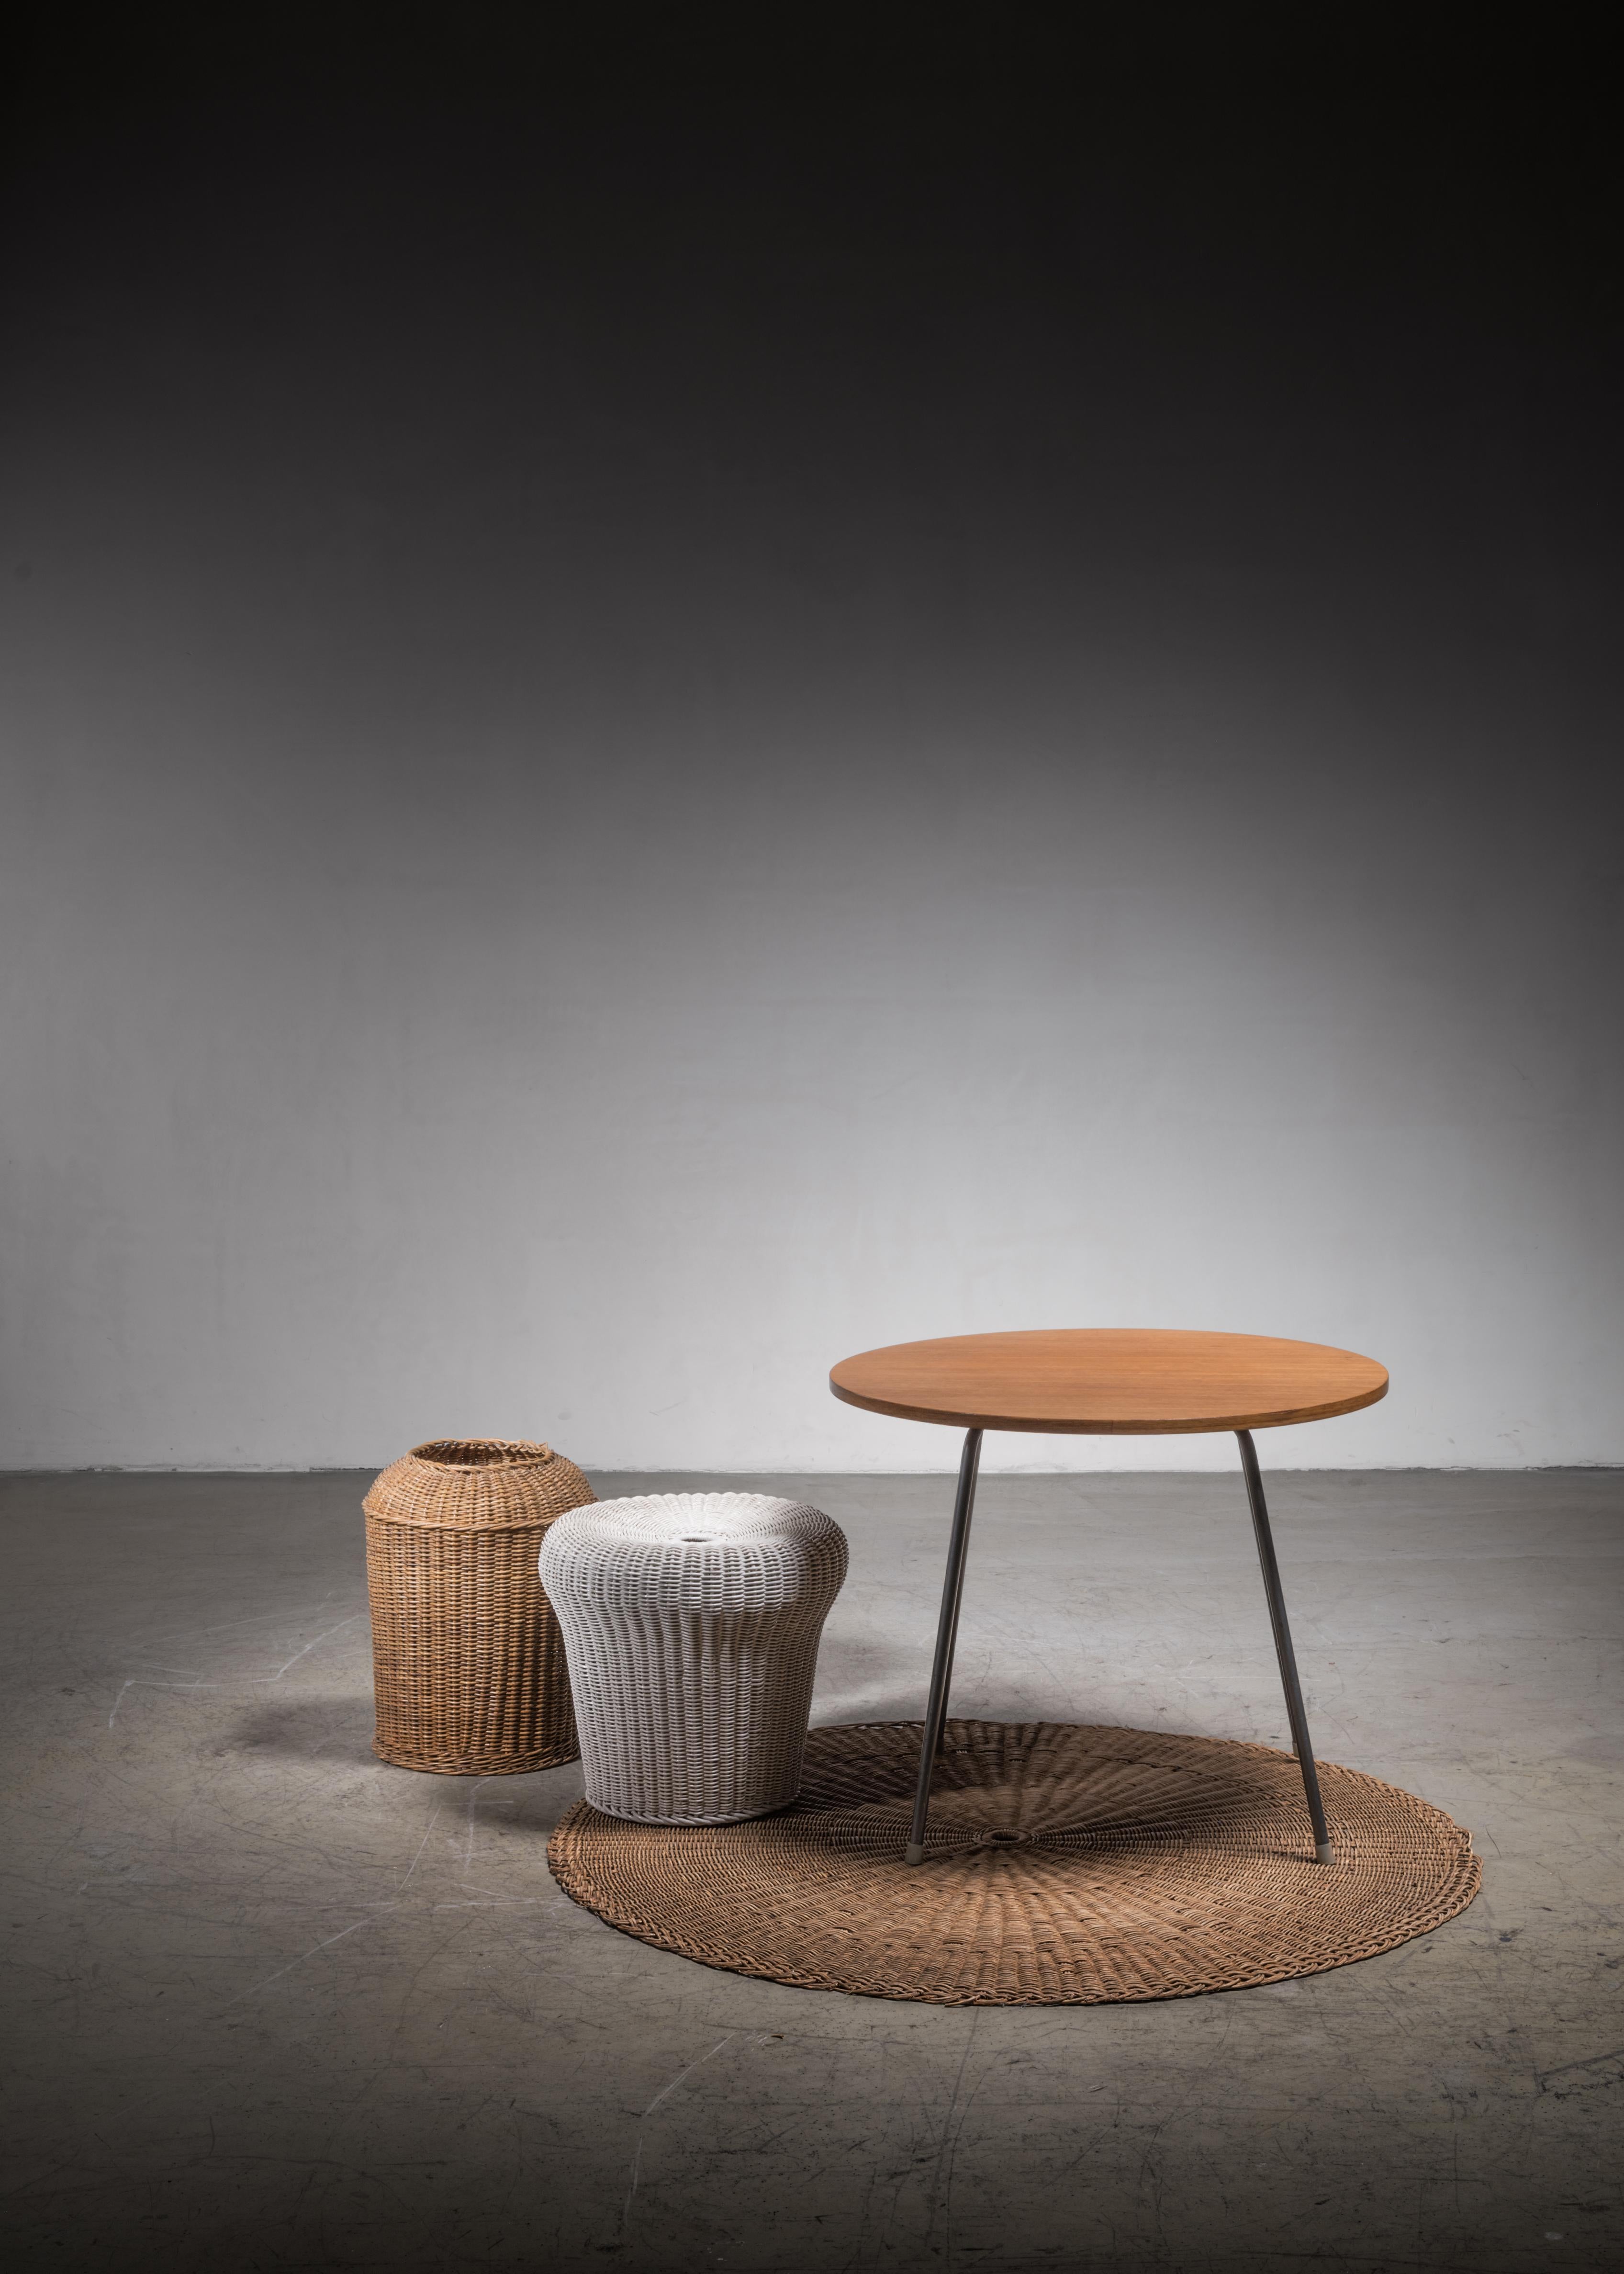 A rare set of four pieces by German architect Egon Eiermann. It includes a 'SE 330' coffee table designed in 1952 for Wilde & Spieth and a wicker waste basket and floor mat designed in circa 1949 and produced by Friedrich Herr.

Please note that the